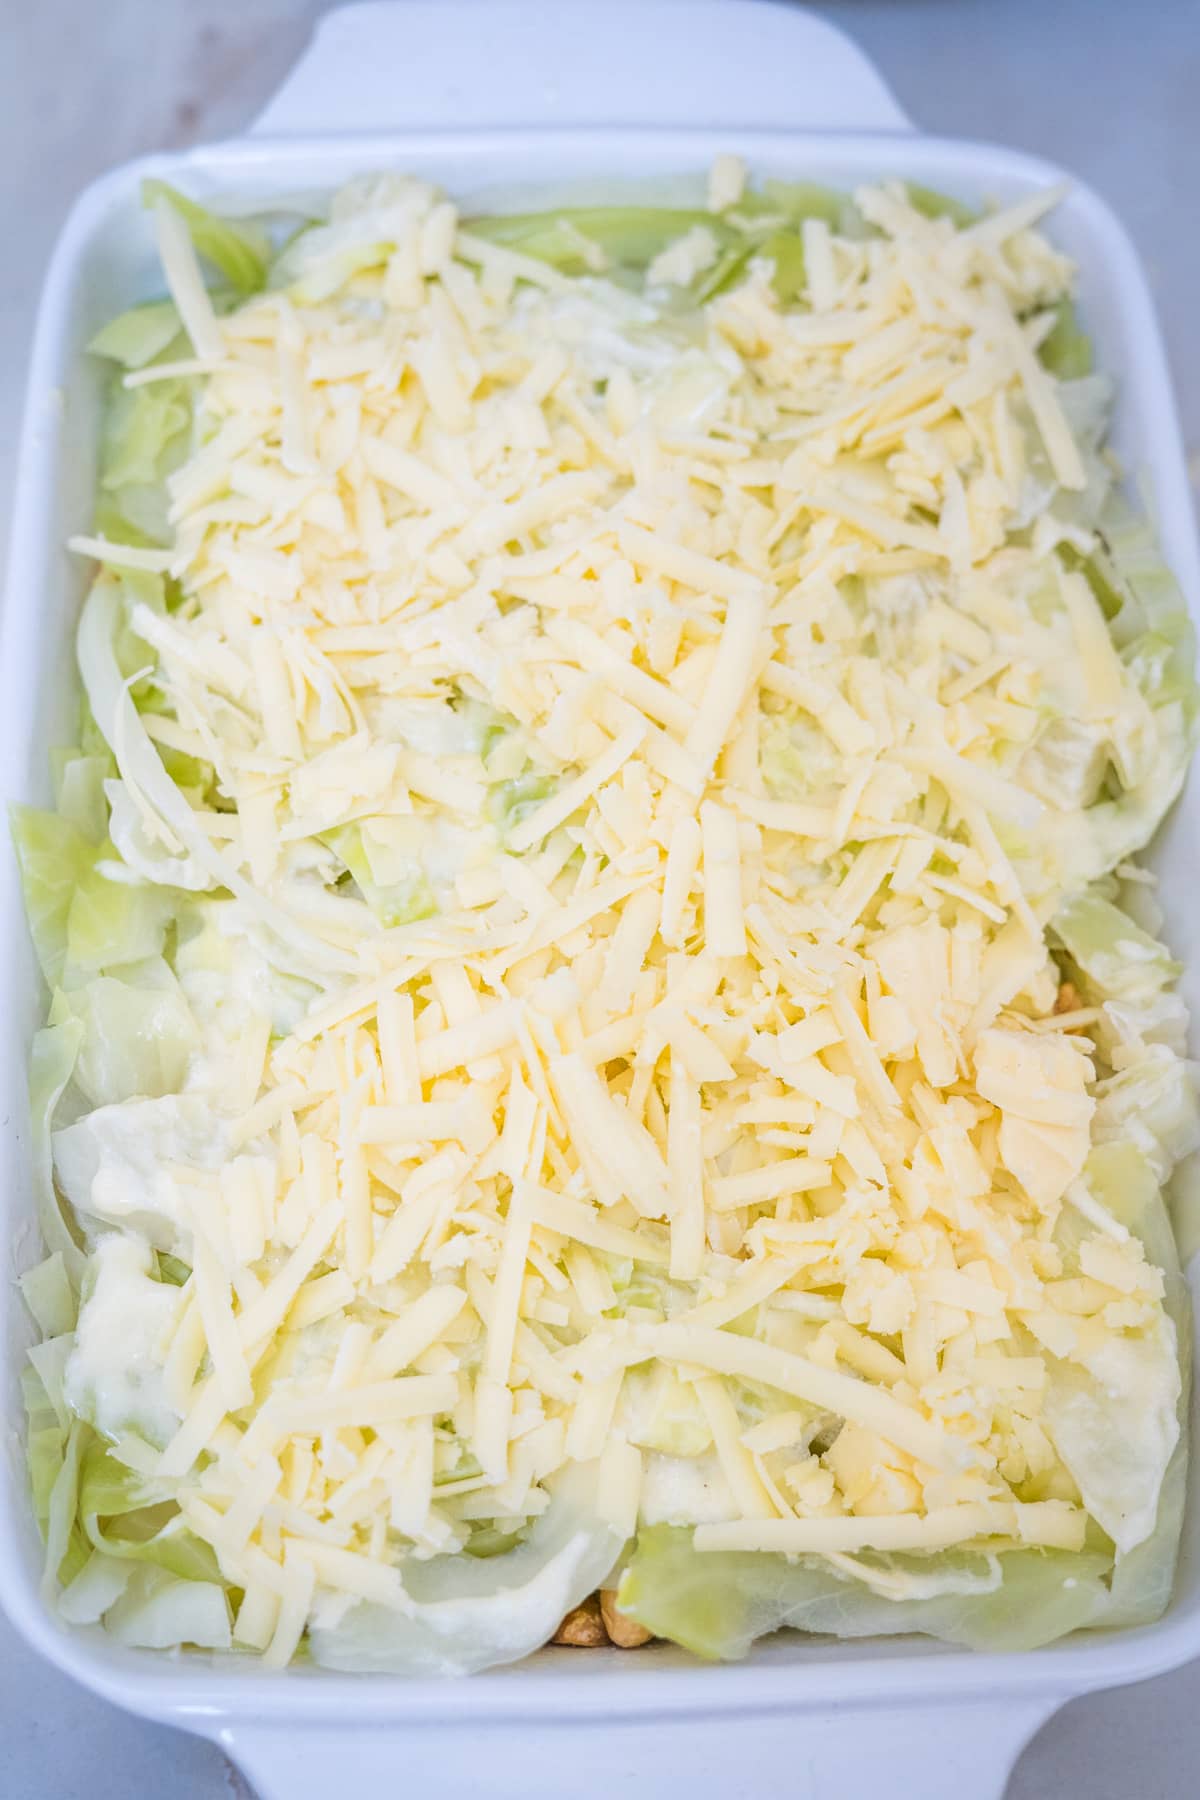 A casserole dish filled with cabbage and cheese.